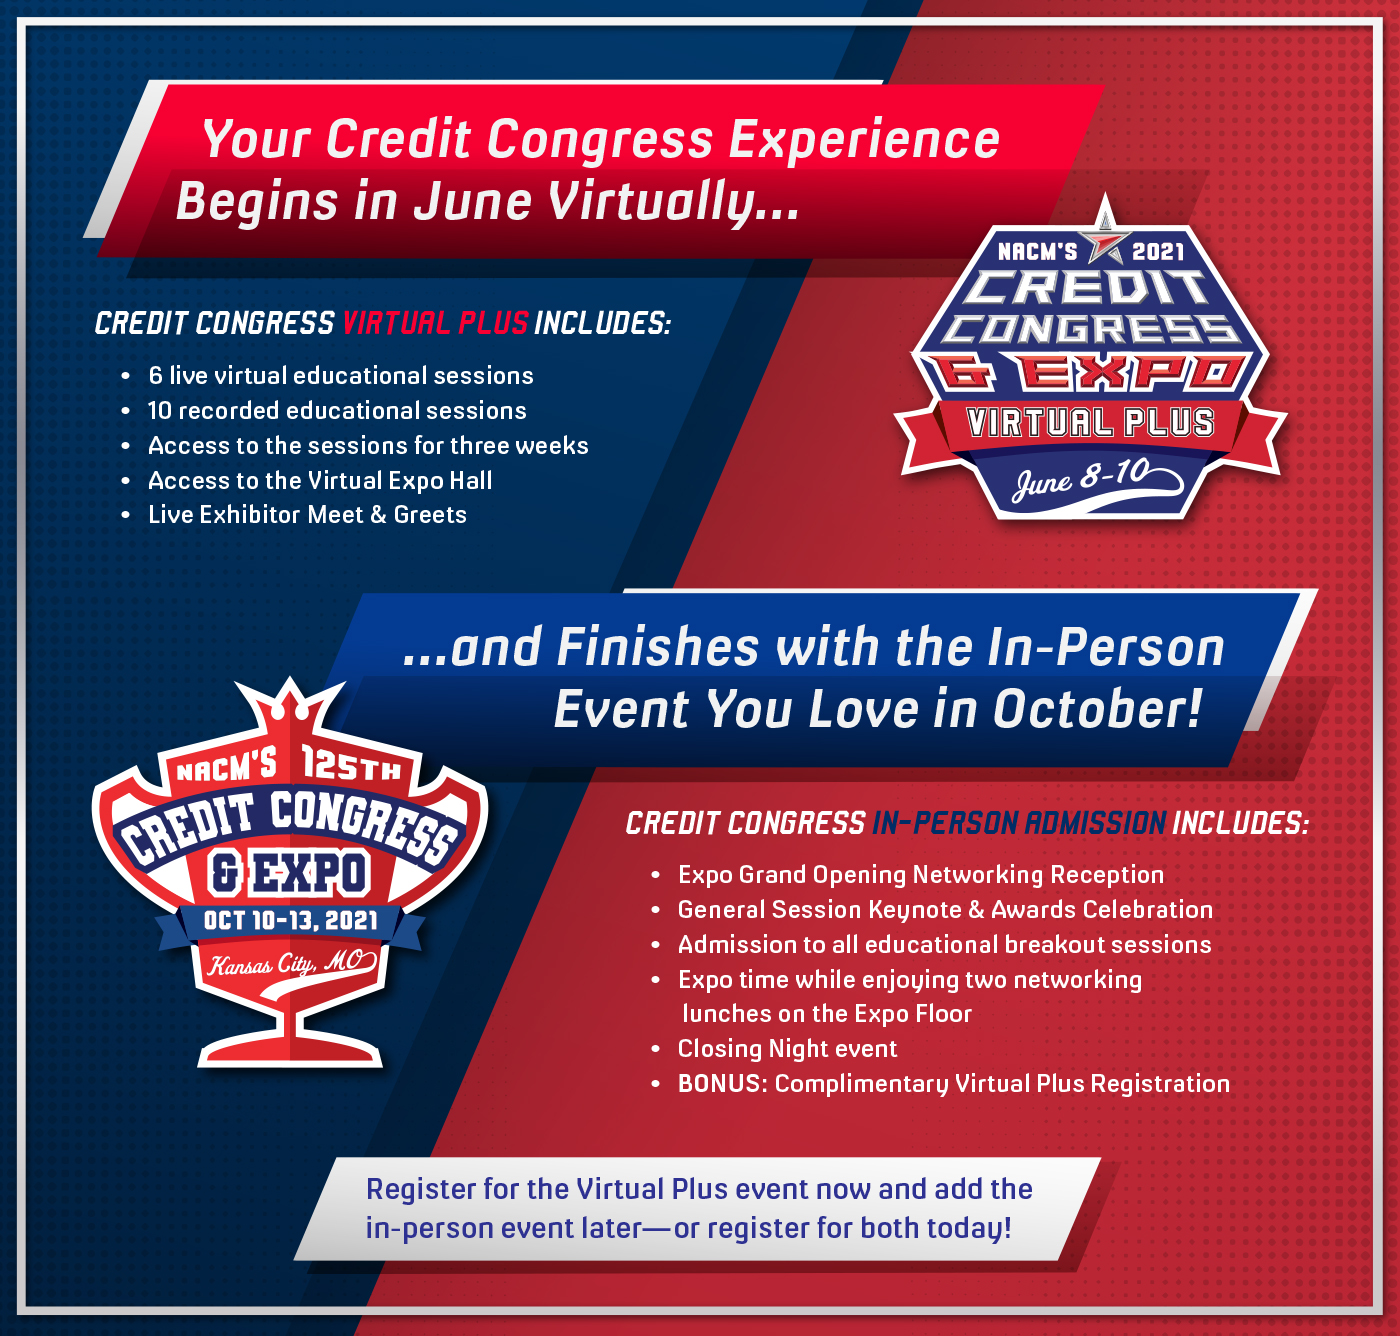 Learn more about this year's Credit Congress offerings